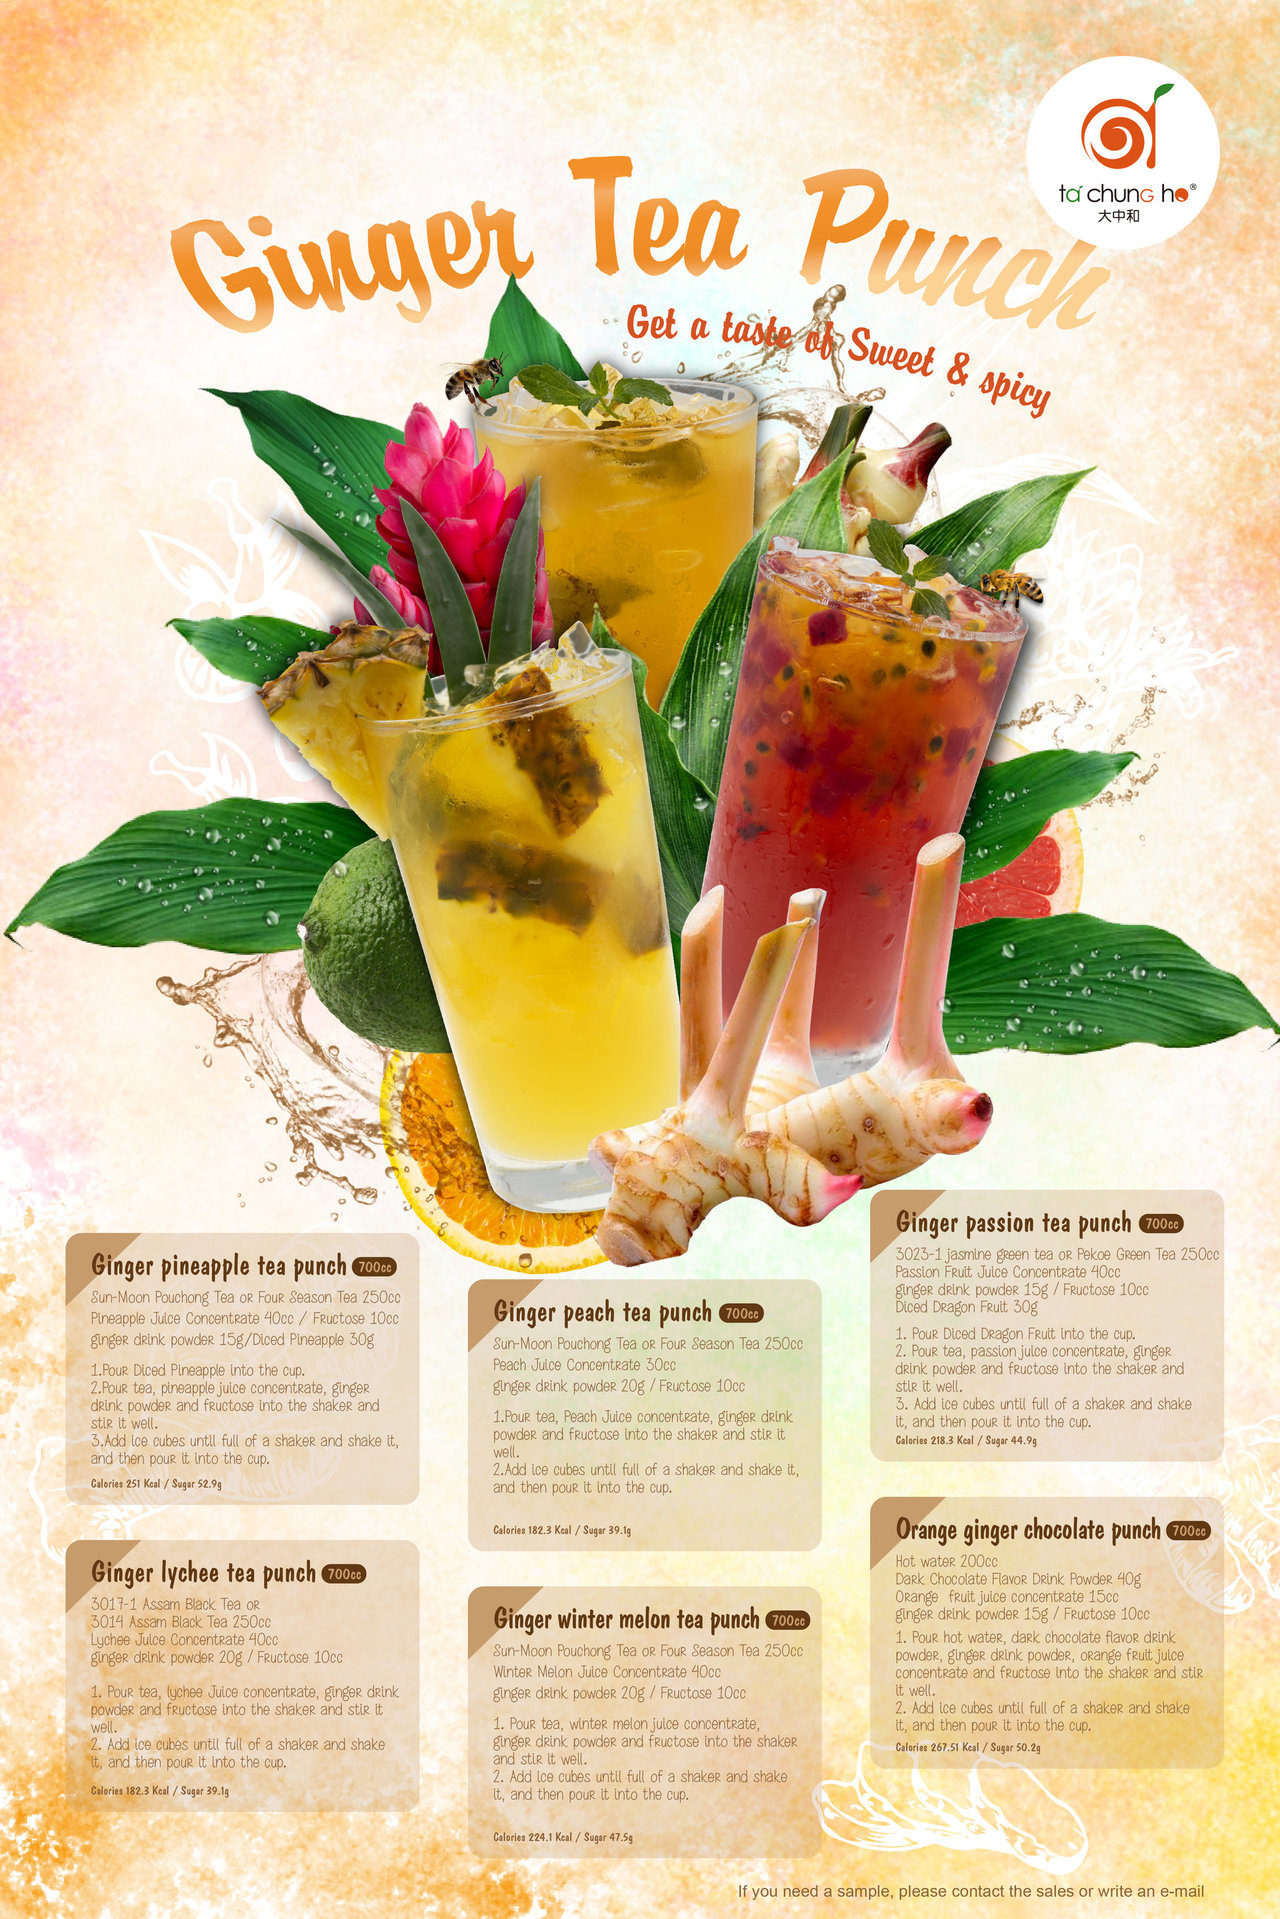 Ginger Tea Punch—Get a taste of Sweet & spicy - Pouchong Tea,Four Season Tea,ginger drink powder,Diced Pineapple,bubbletea,boba,tapiocapearls